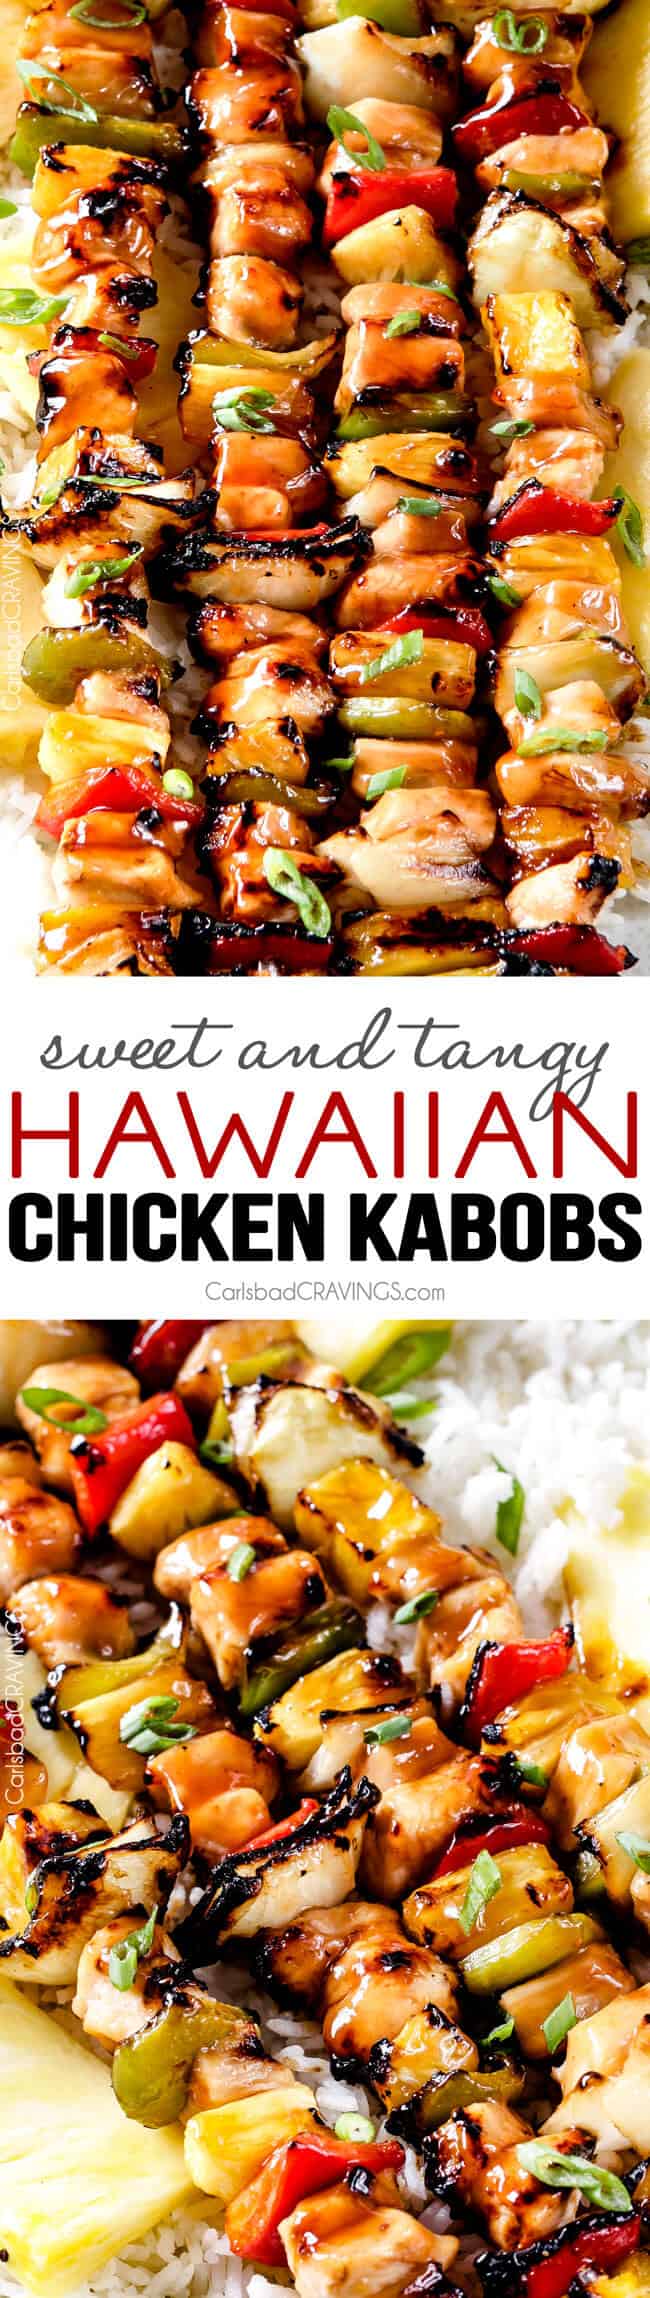 Grilled (or broiled) Hawaiian Chicken Kabobs - this is my new favorite grill recipe! the chicken is so juicy and flavorful and the sweet and sour Hawaiian Sauce (that doubles as a marinade) is out of this world!